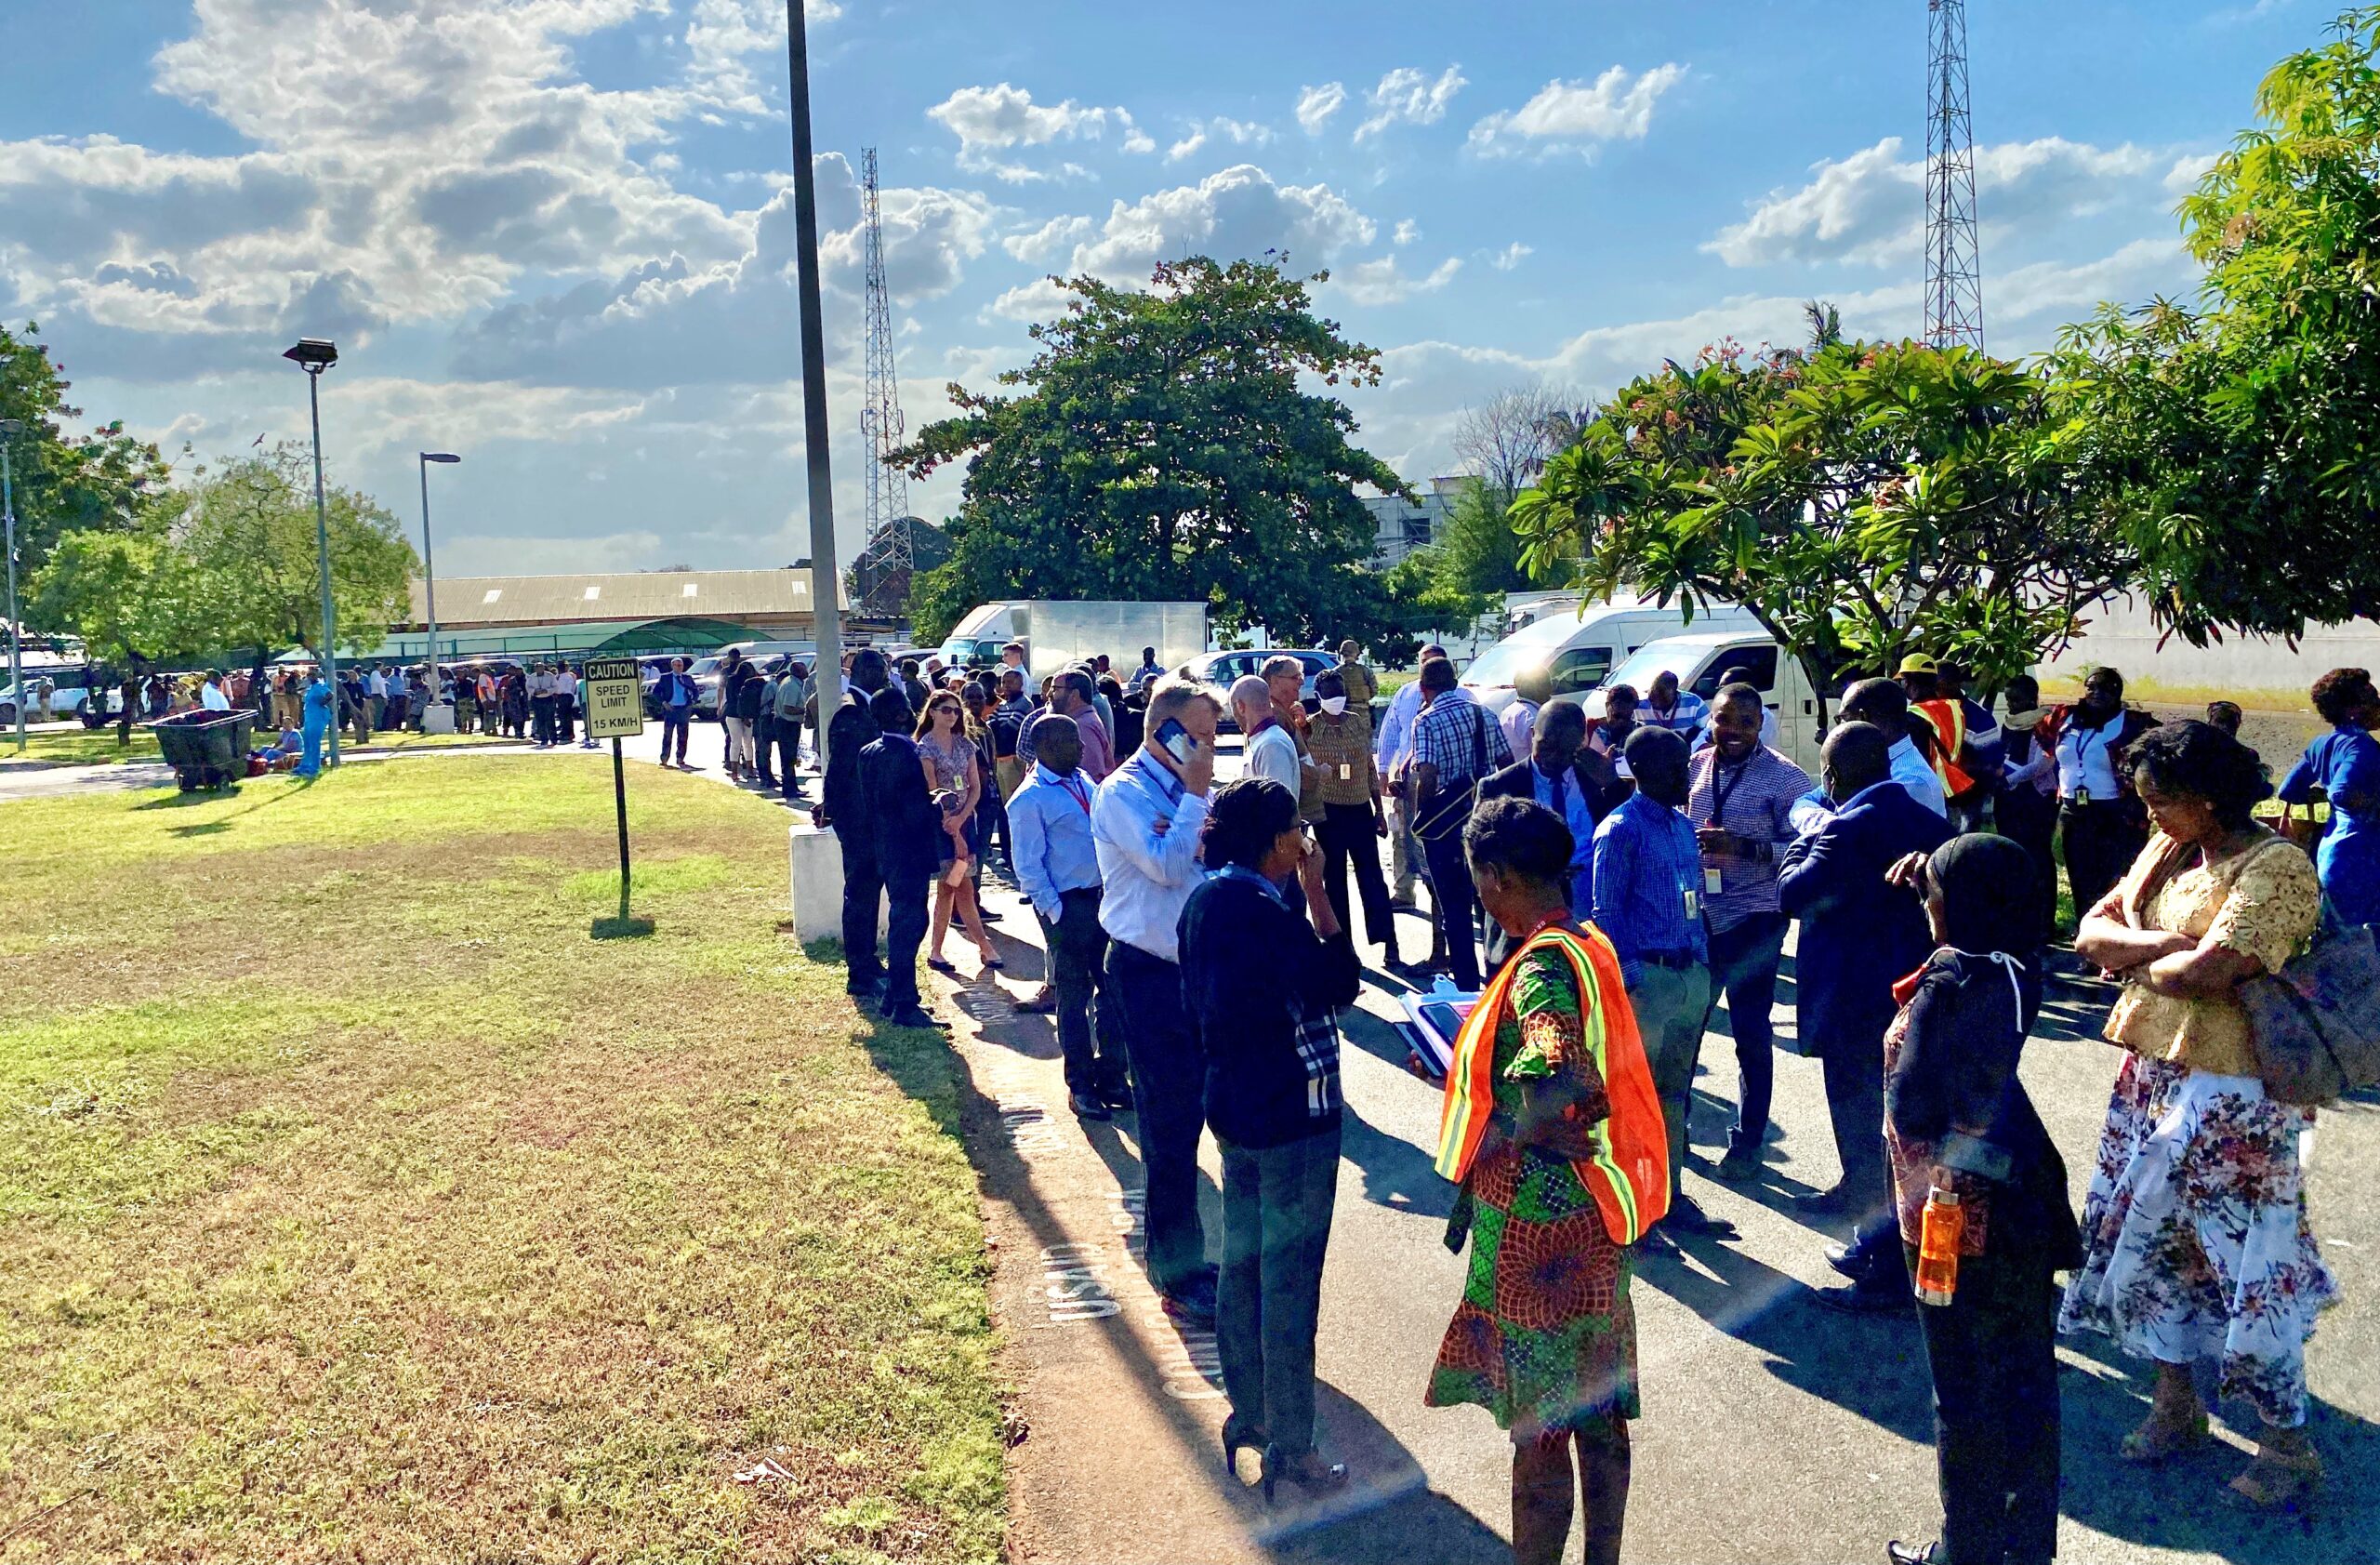 U.S. Embassy employees evacuate buildings and gather at a rally point during an exercise, Dar es Salaam, Tanzania, July 6, 2021. (U.S. Department of State photo)